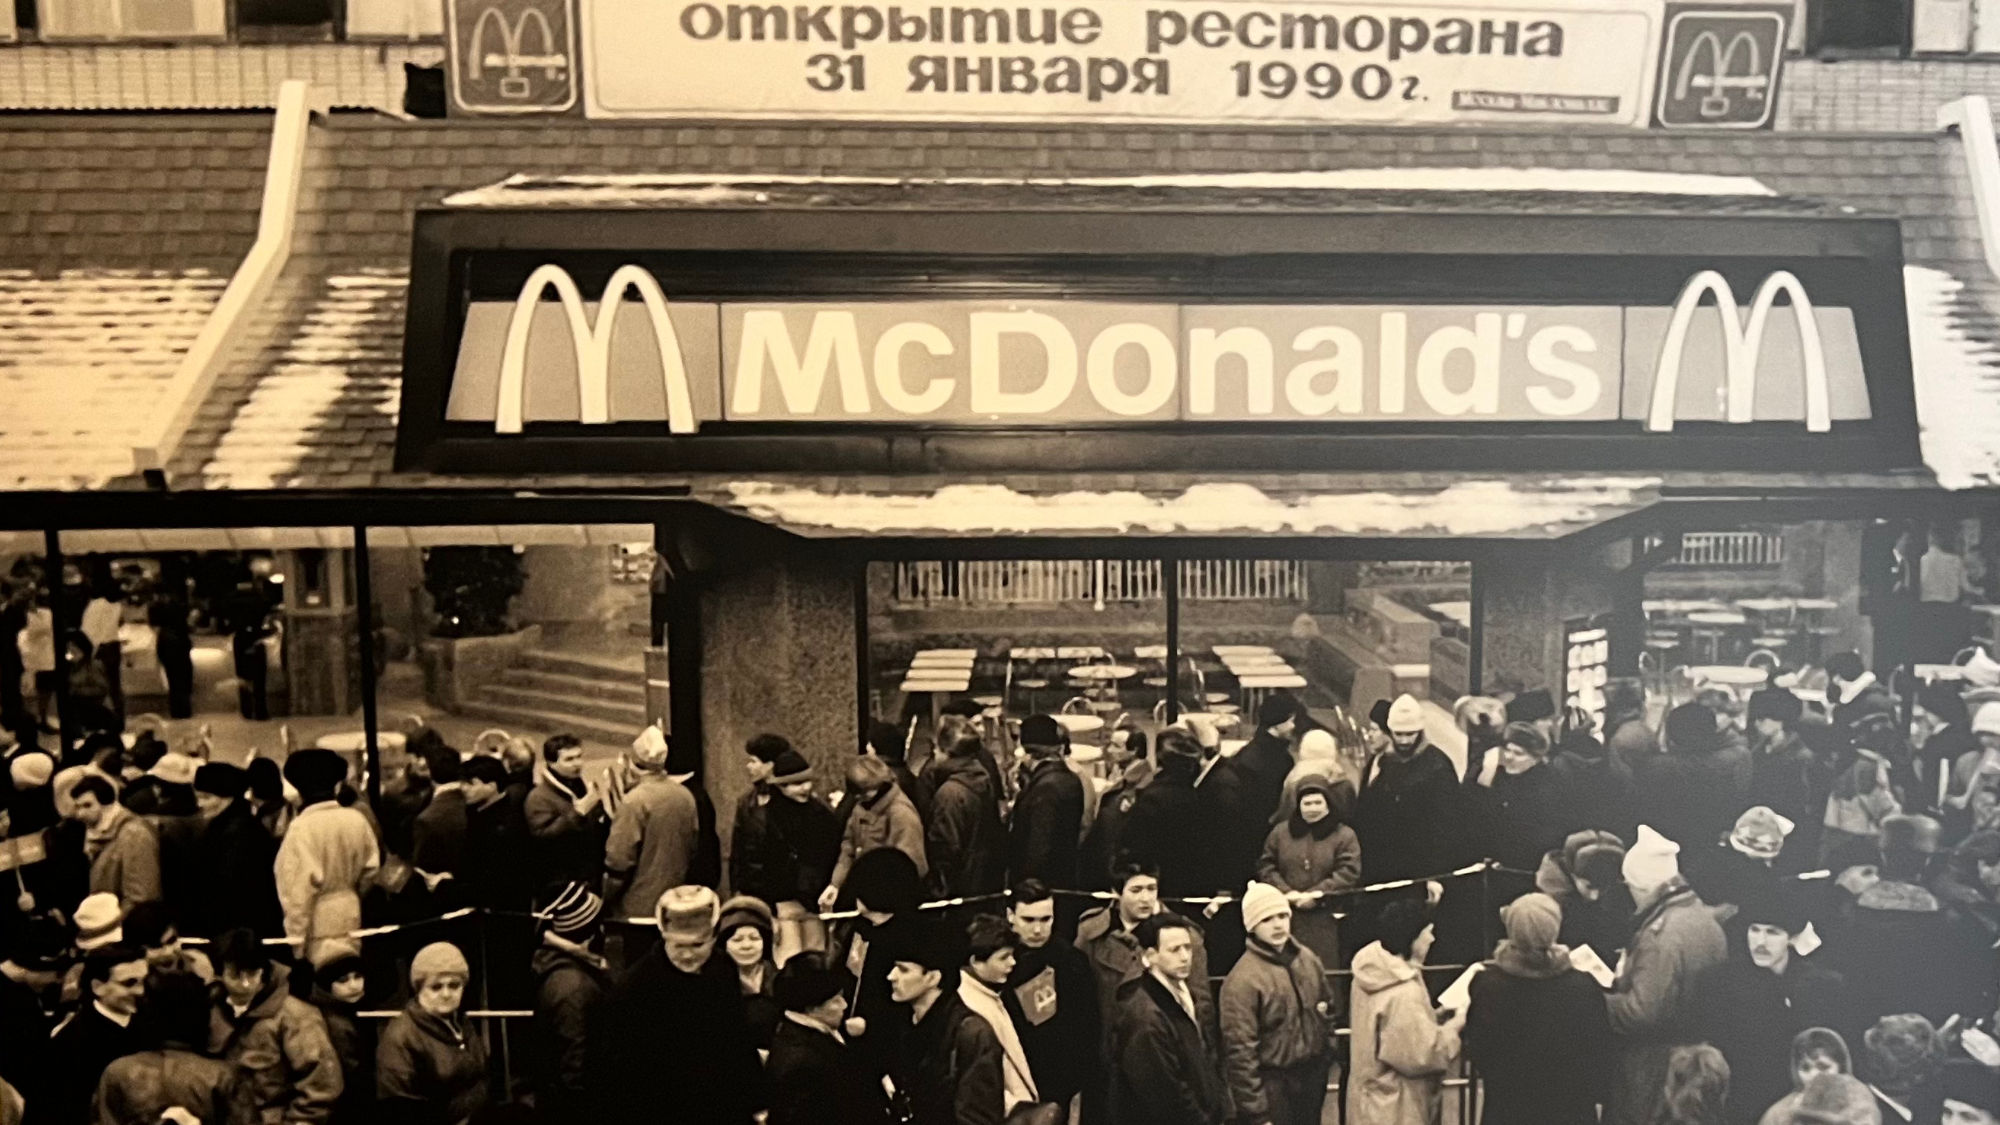 Moscow's First McDonald's